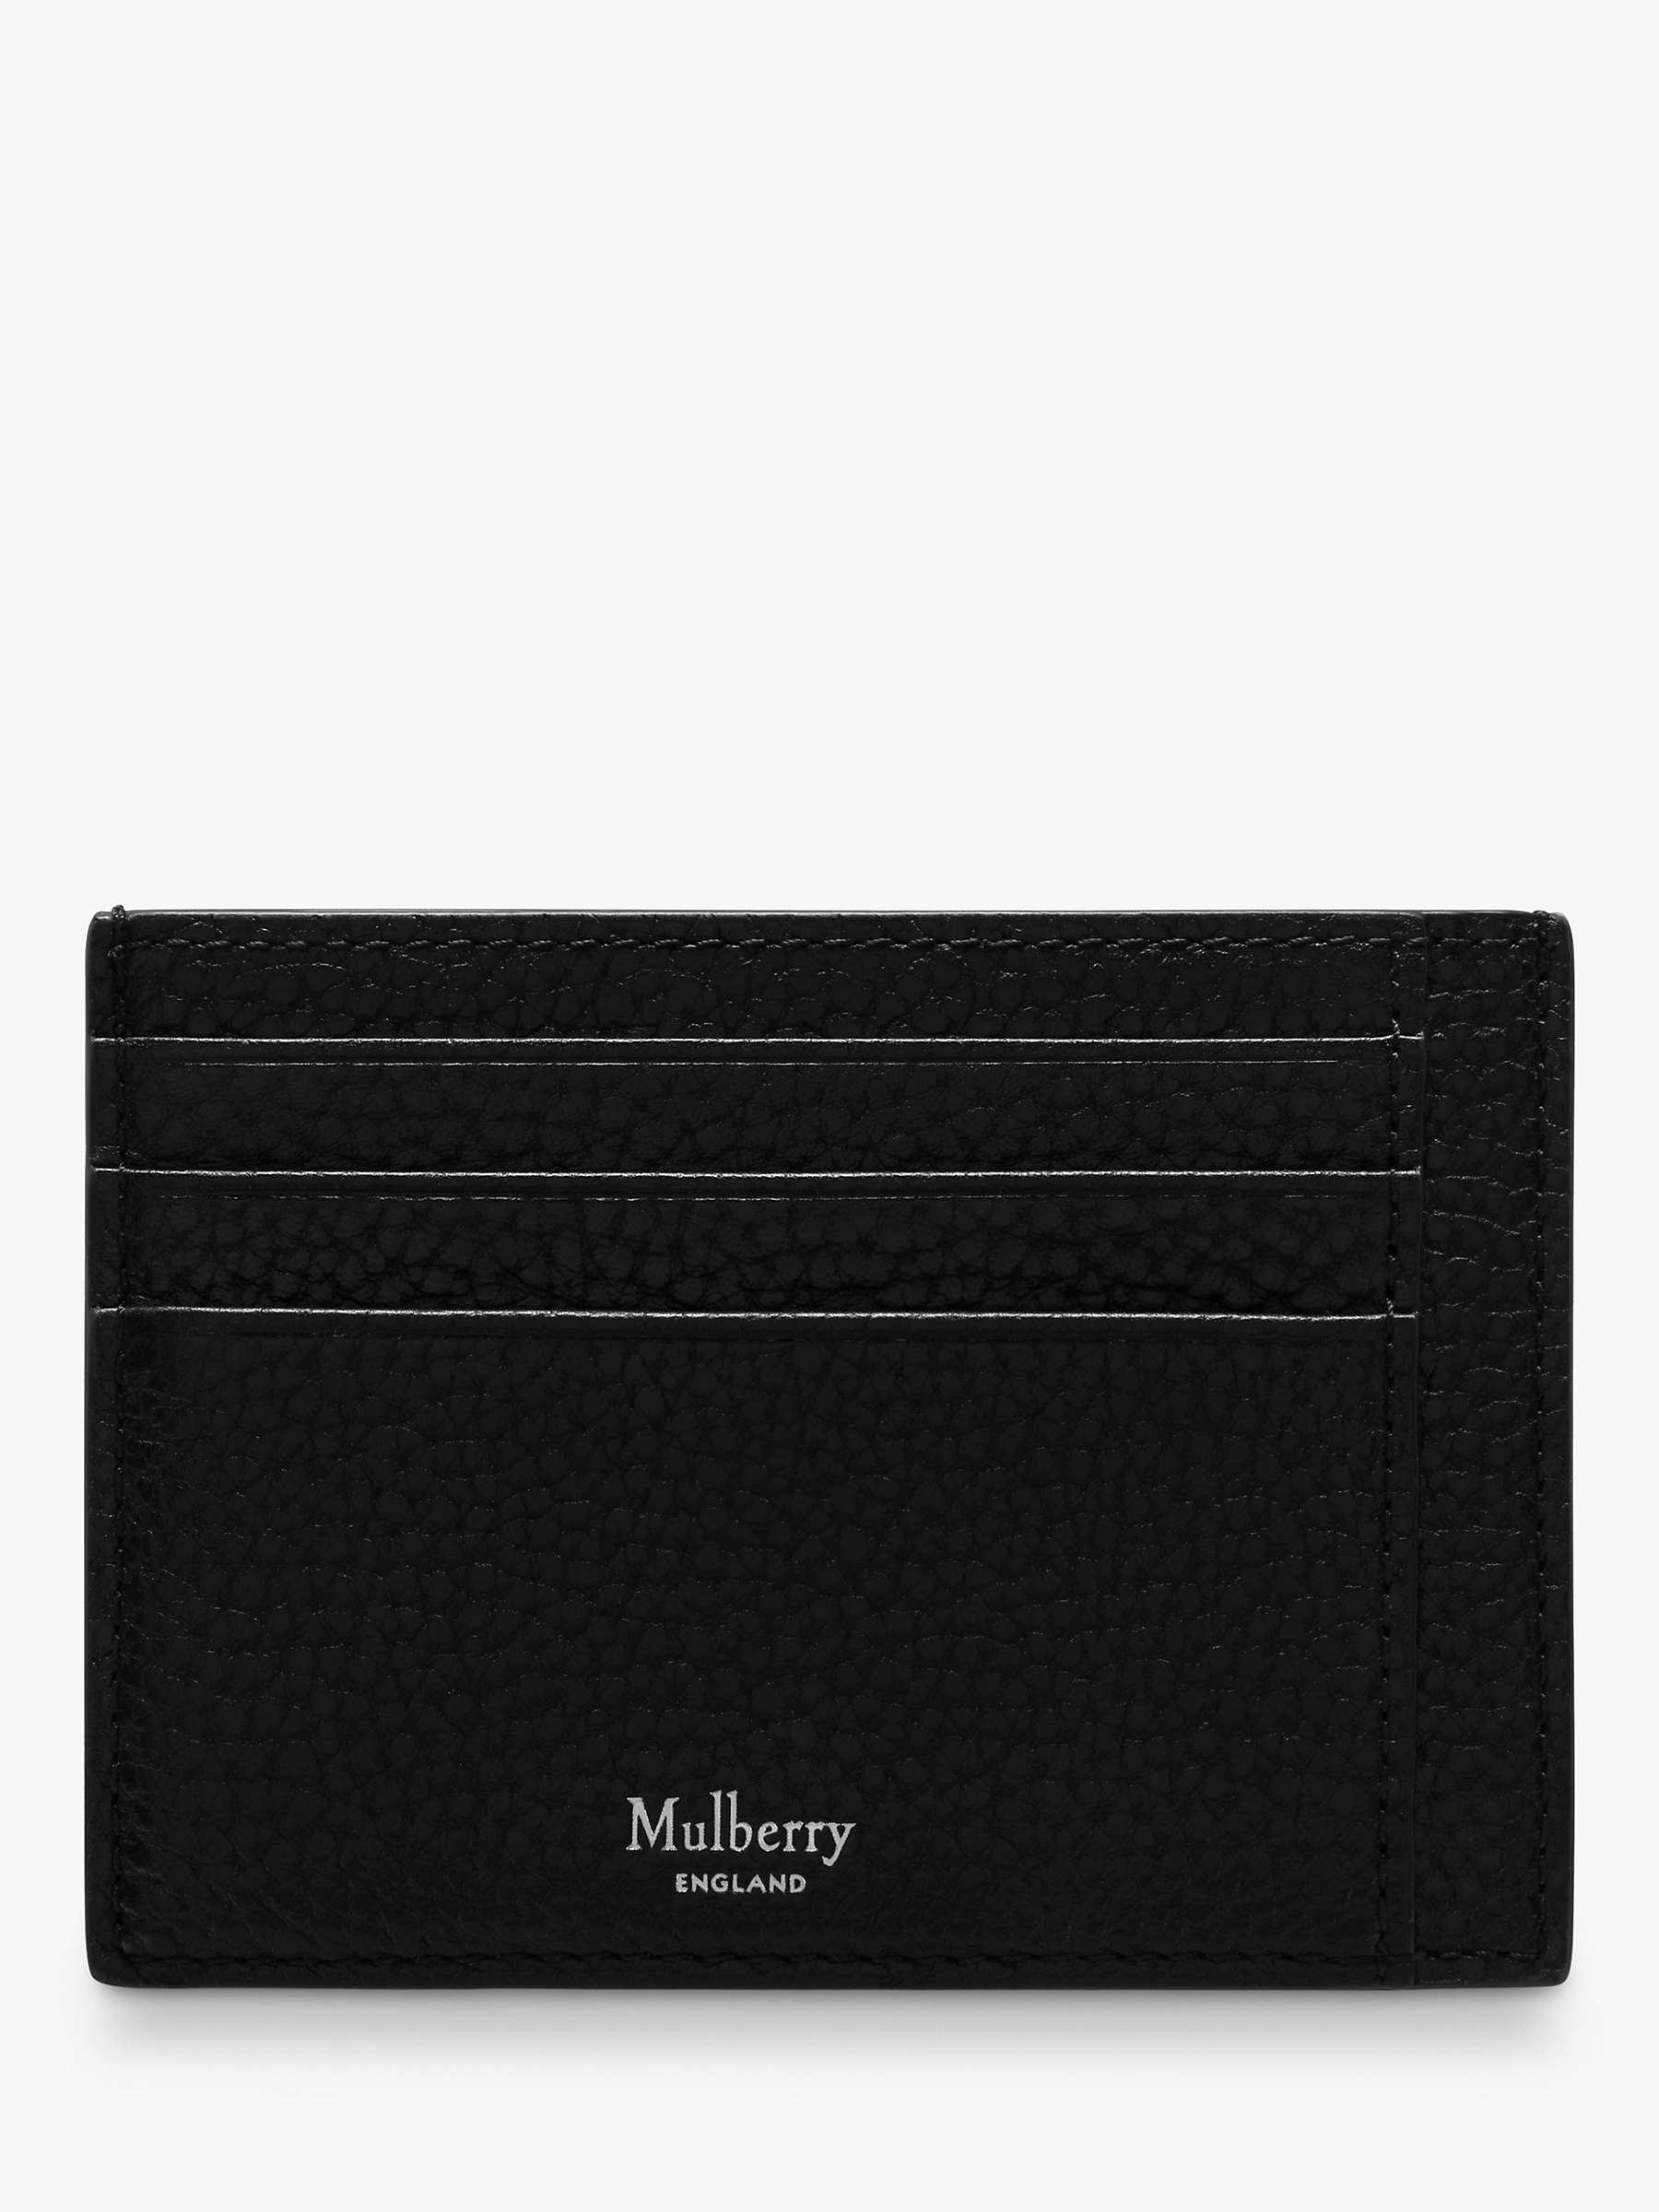 Buy Mulberry Small Classic Grain Leather Card Holder Online at johnlewis.com